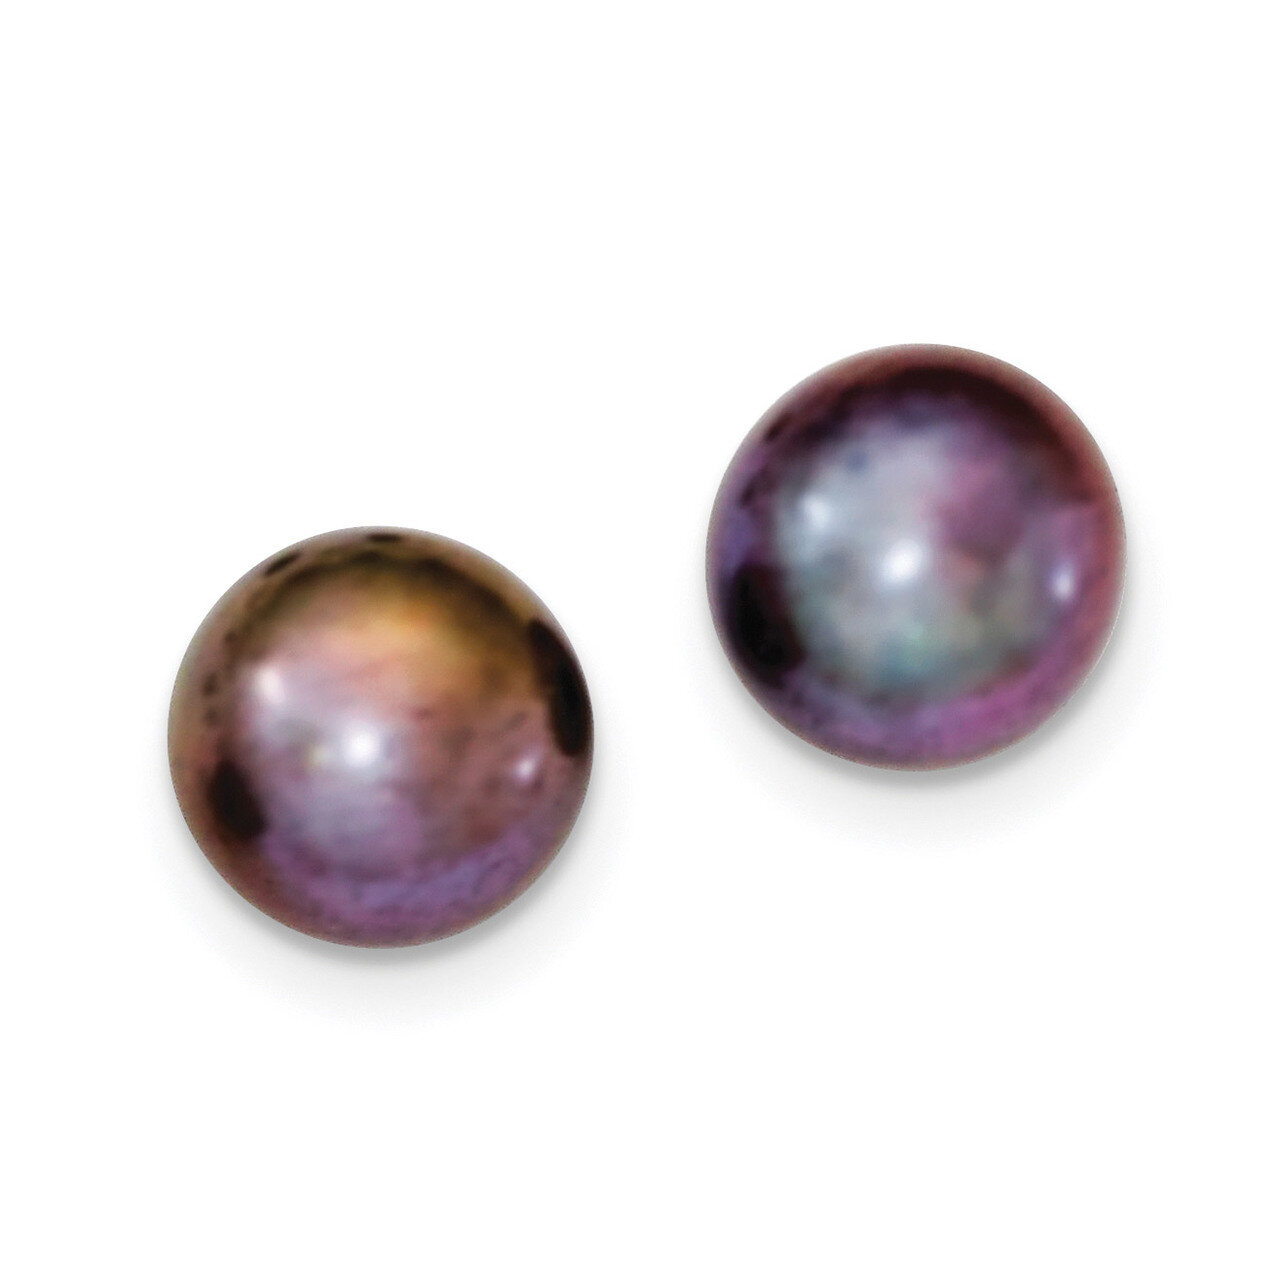 12-13mm Black Freshwater Cultured Button Pearl Stud Earrings Sterling Silver QE12671